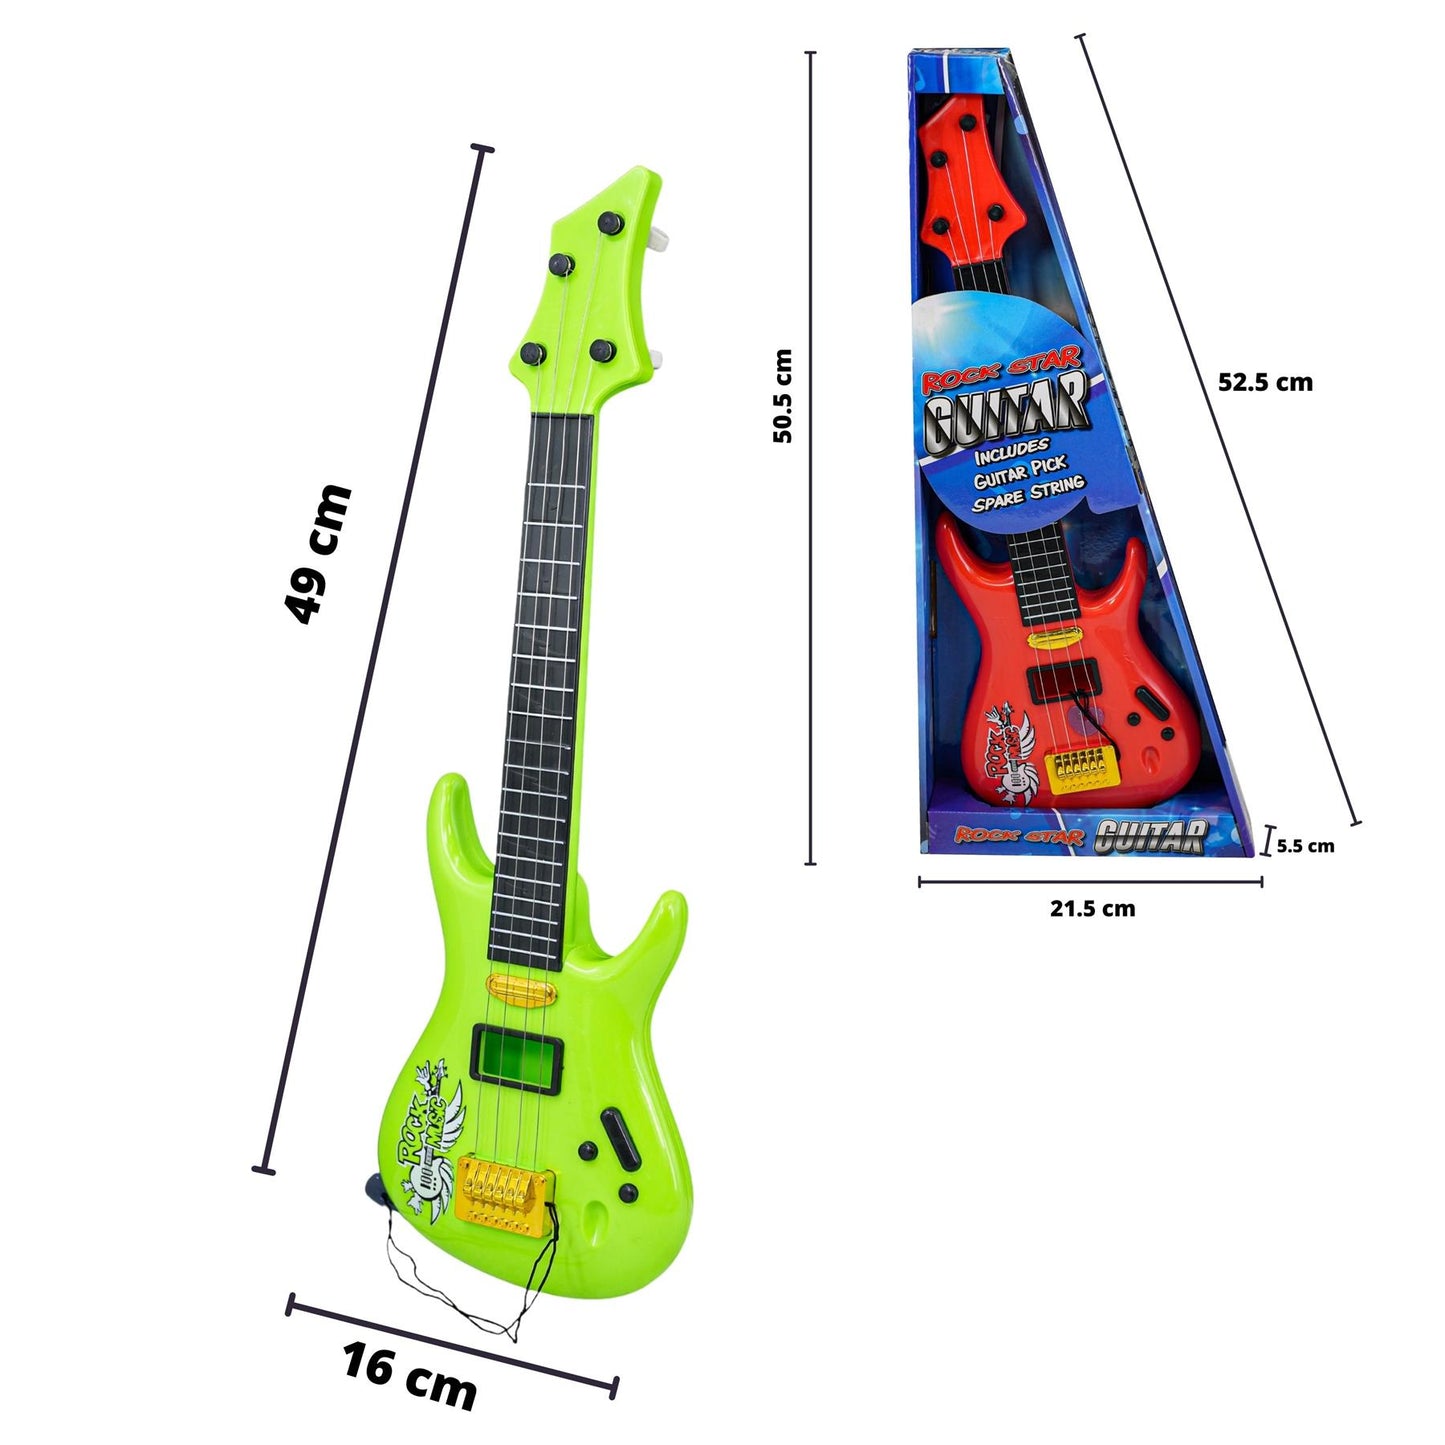 19 Inches Kids Plastic Acoustic Guitar by The Magic Toy Shop - UKBuyZone